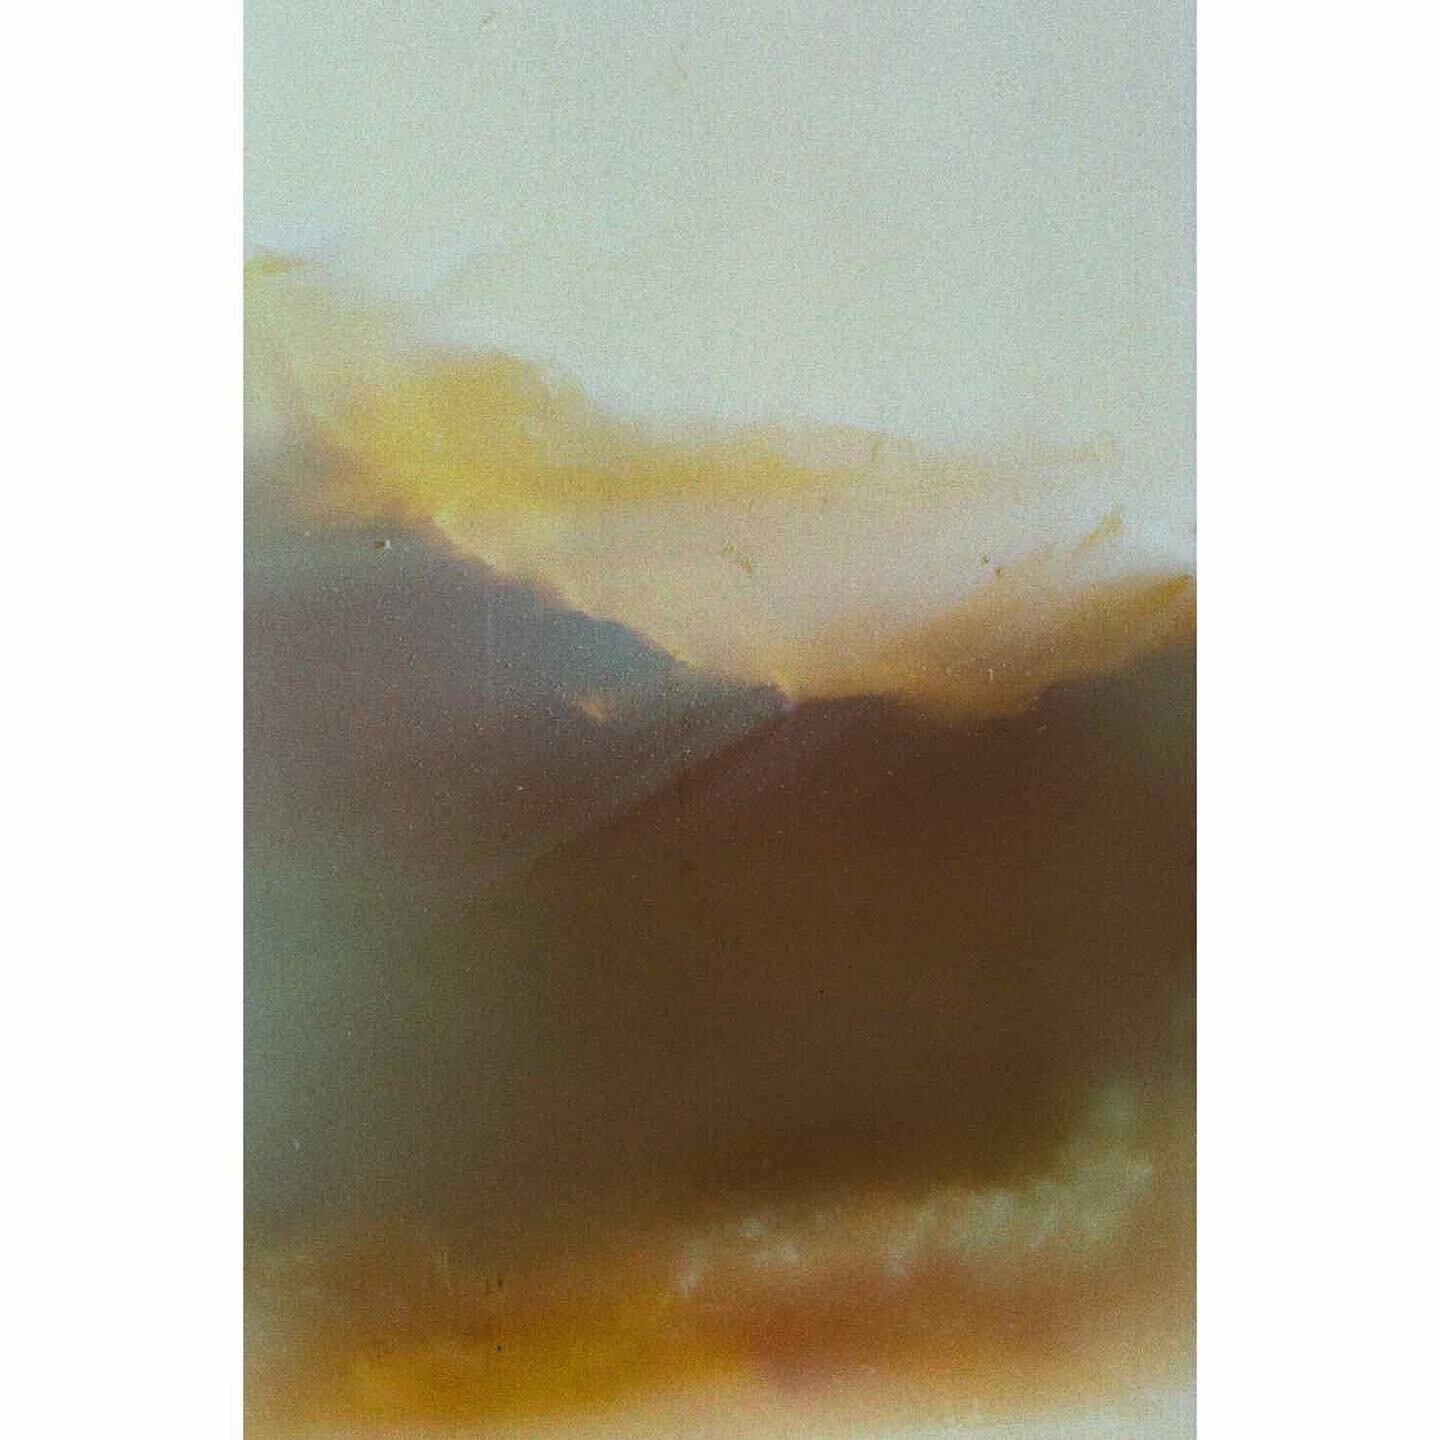 &ldquo;Imagined Landscape #22,&rdquo; 2020. I&rsquo;m excited to share some new work made with an old homemade camera. 
.
.
.
.
.
.
#alternativeprocesses #antiquatedphotography #landscape #landscapephotography #landscapeart #colorfilm #earth #poetry 